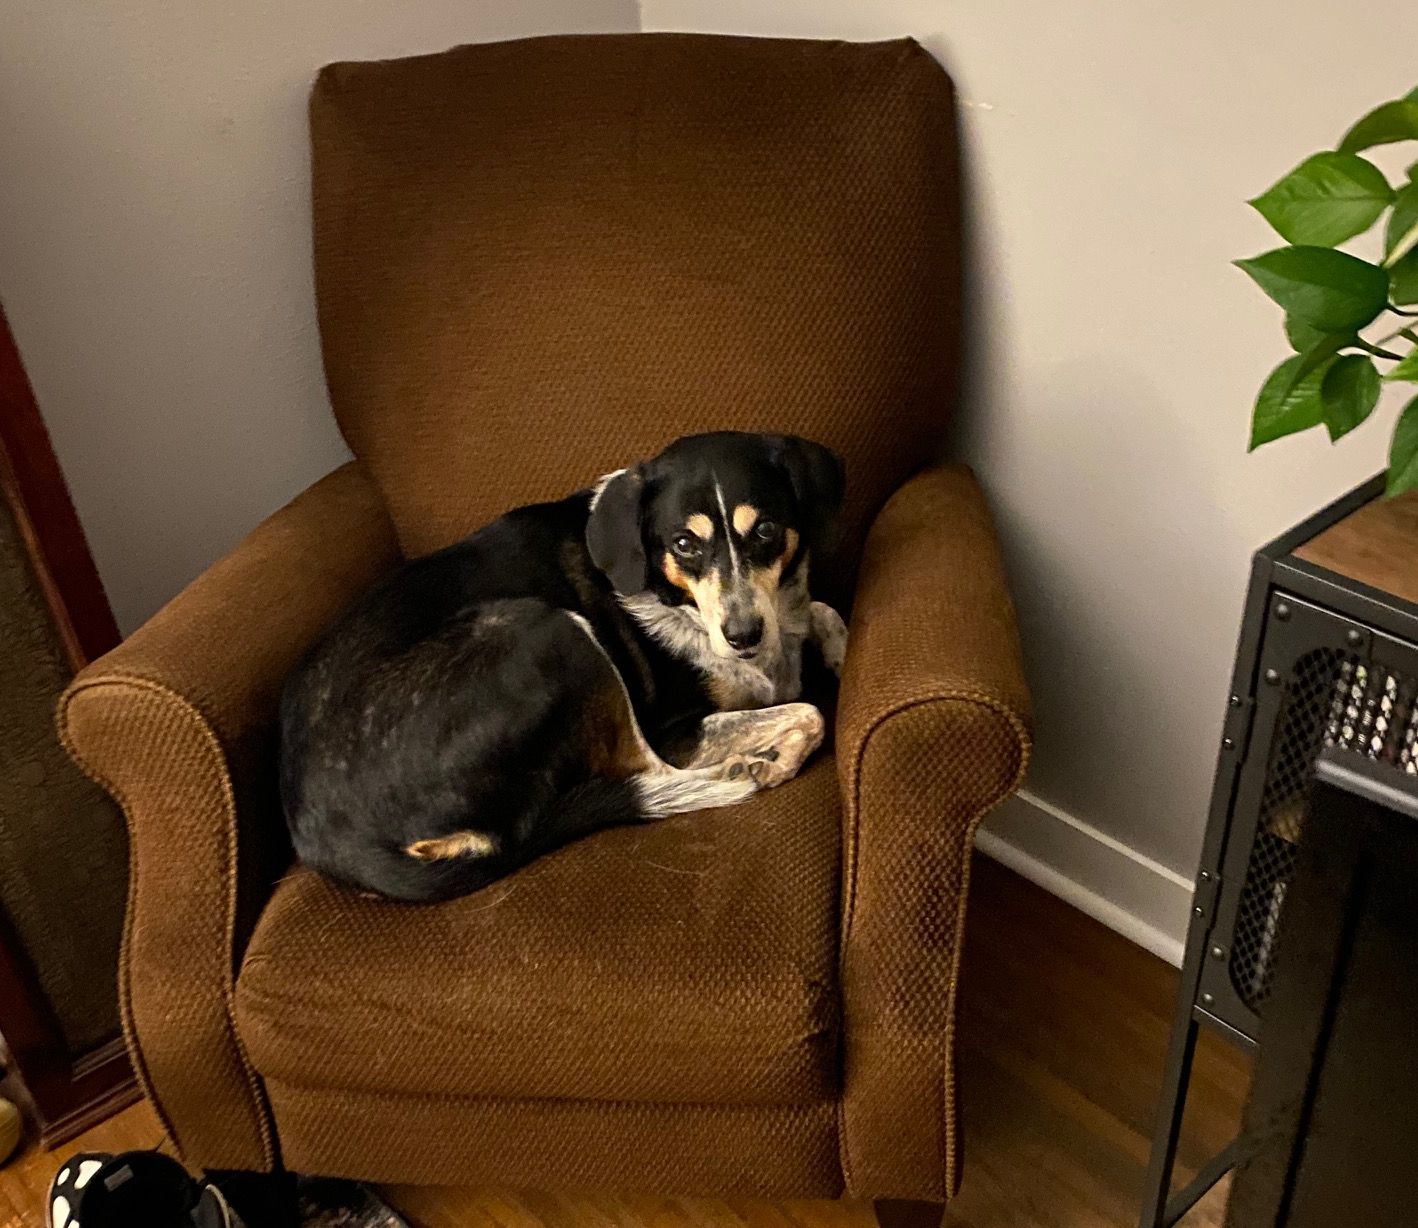 A black and white dog with brown eyebrows sits curled up on a brown fabric chair.